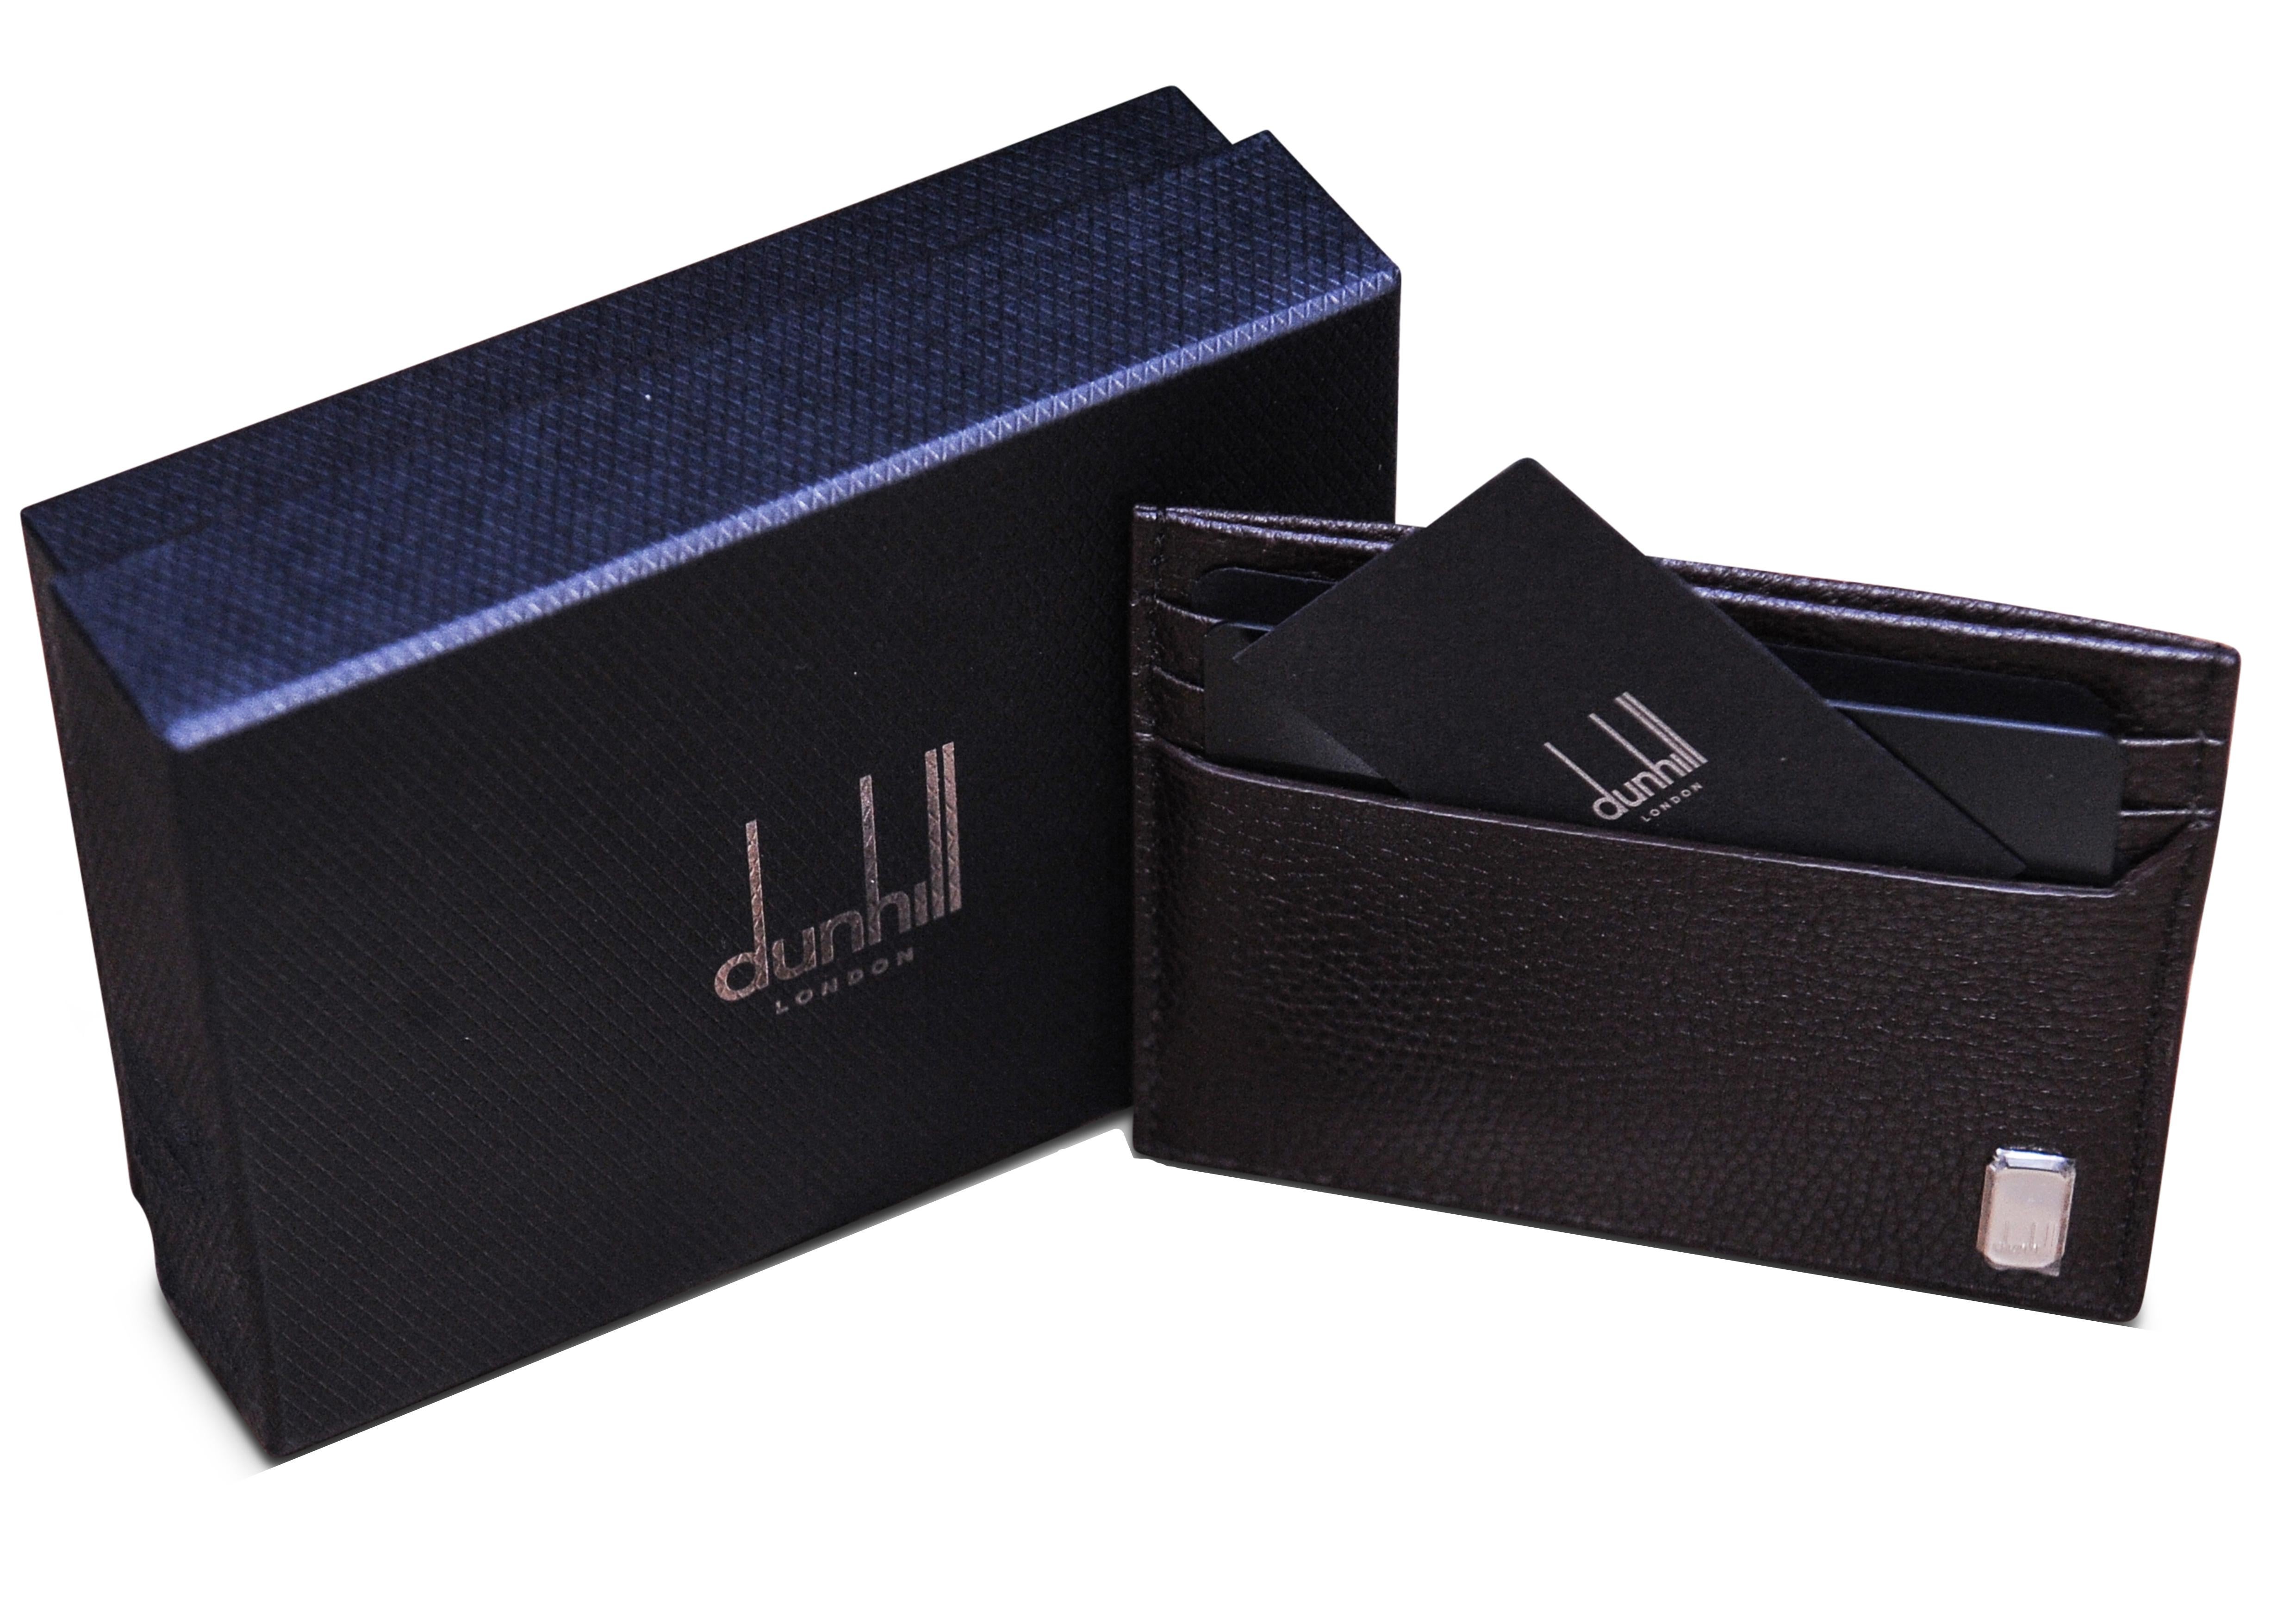 Dunhill of London Brown Belgrave Grained Calf Leather Flat Card Wallet With Steel Engraved Dunhill Logo.

Six card slots, and one centralised pocket. 

Item is complete with black Dunhill Embossed Box & Black Velvet Dust Sheet.
Ideal present.

Made